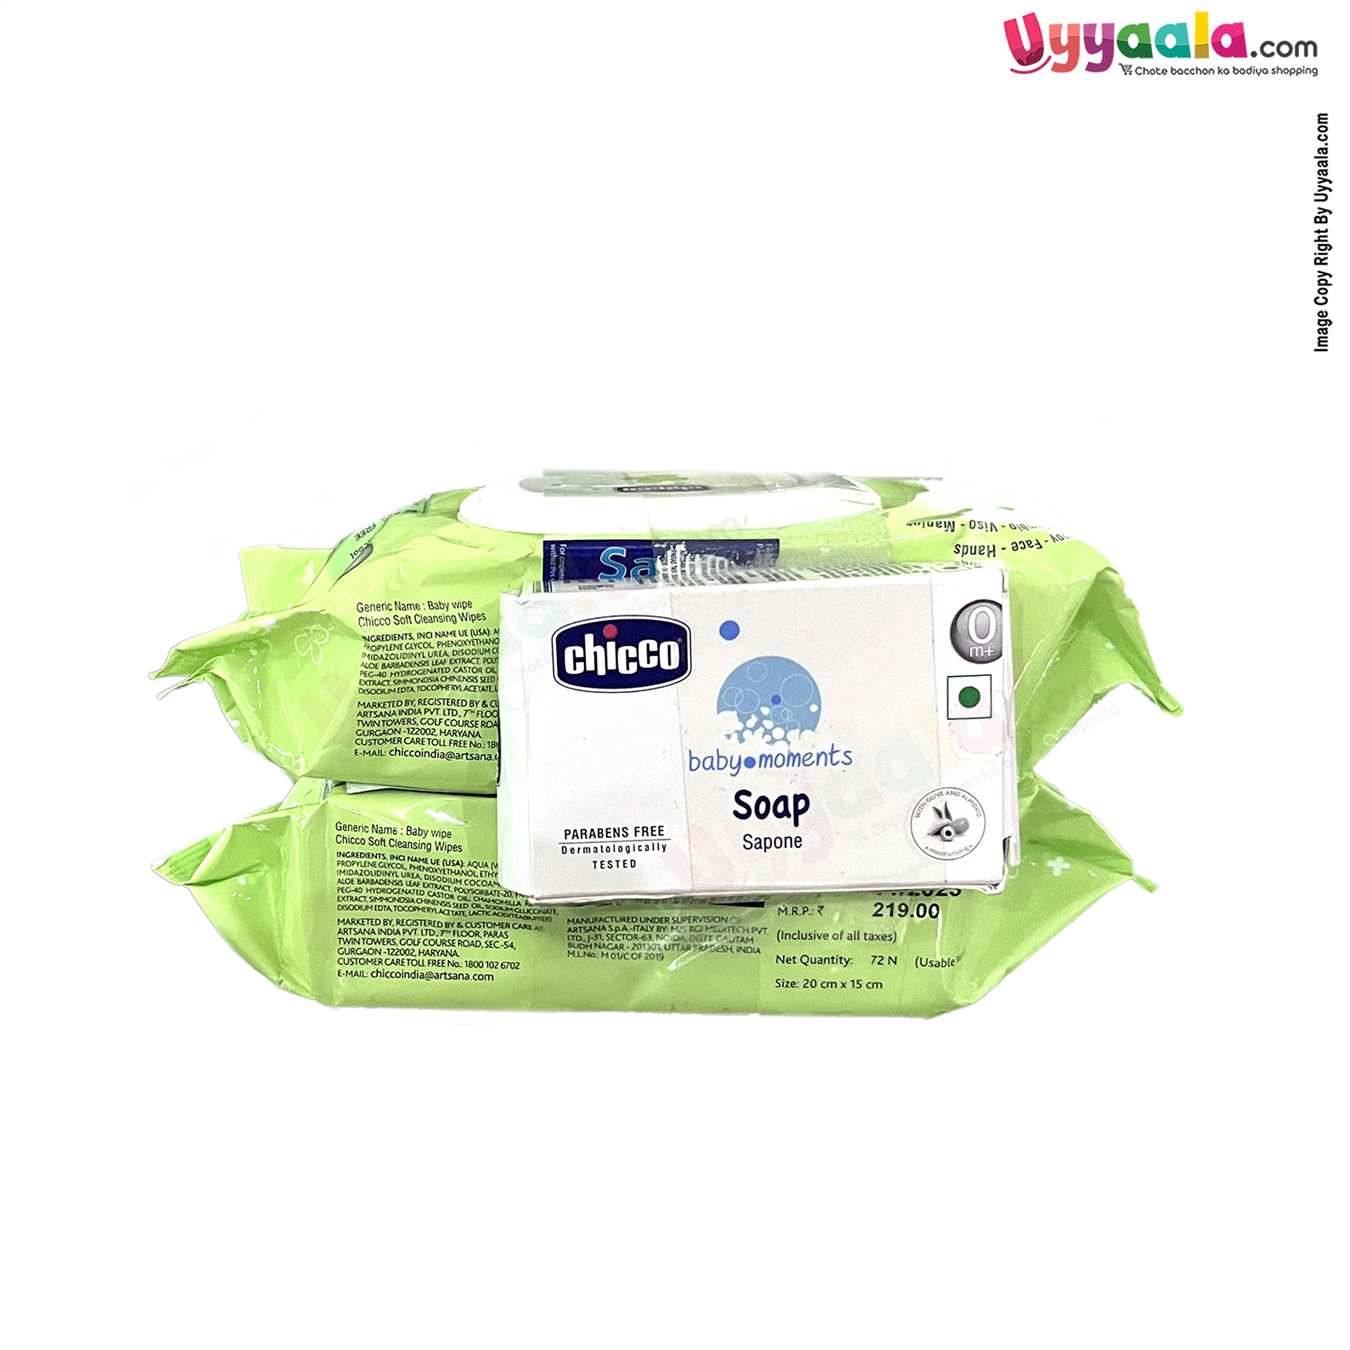 CHICCO Soft Cleansing Wipes, Pack of 2- 72 pcs each with 75g Soap Free